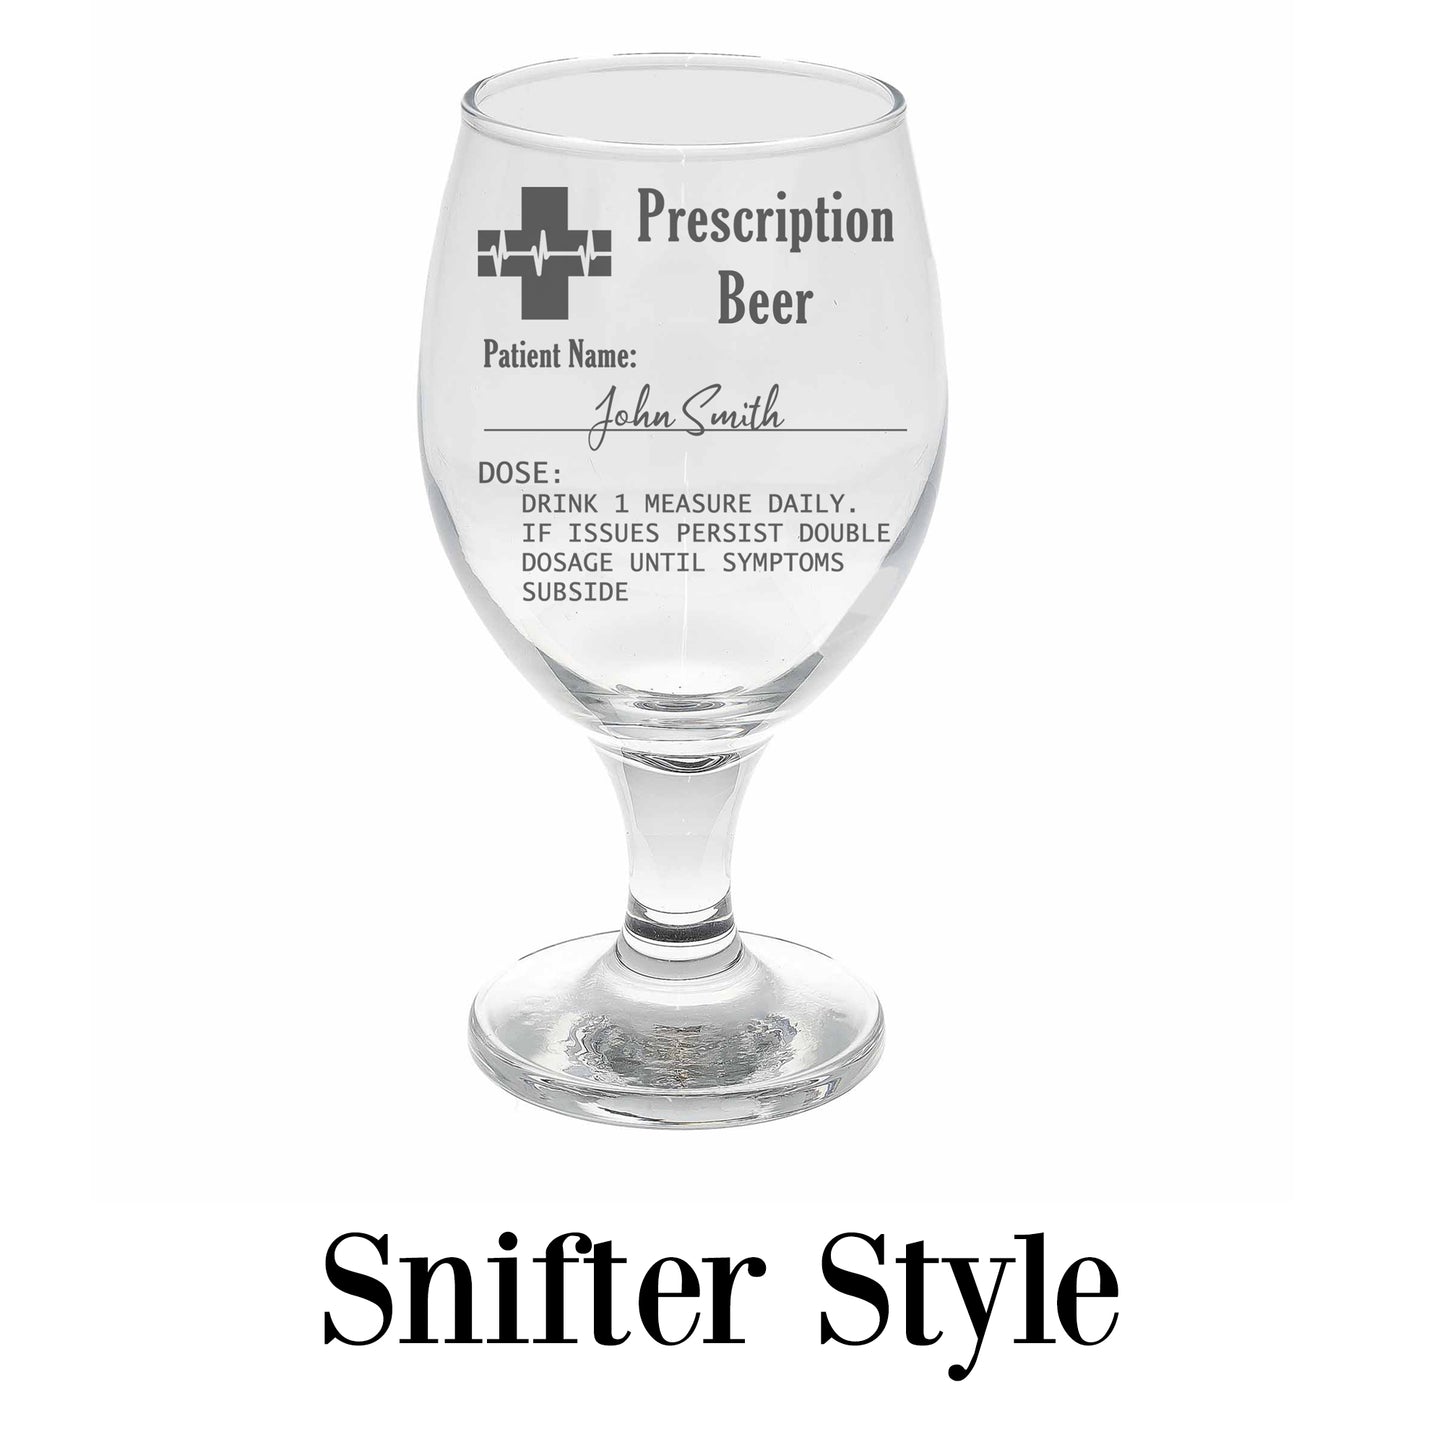 Personalised Engraved Prescription Cider Glass with any Name  - Always Looking Good -   